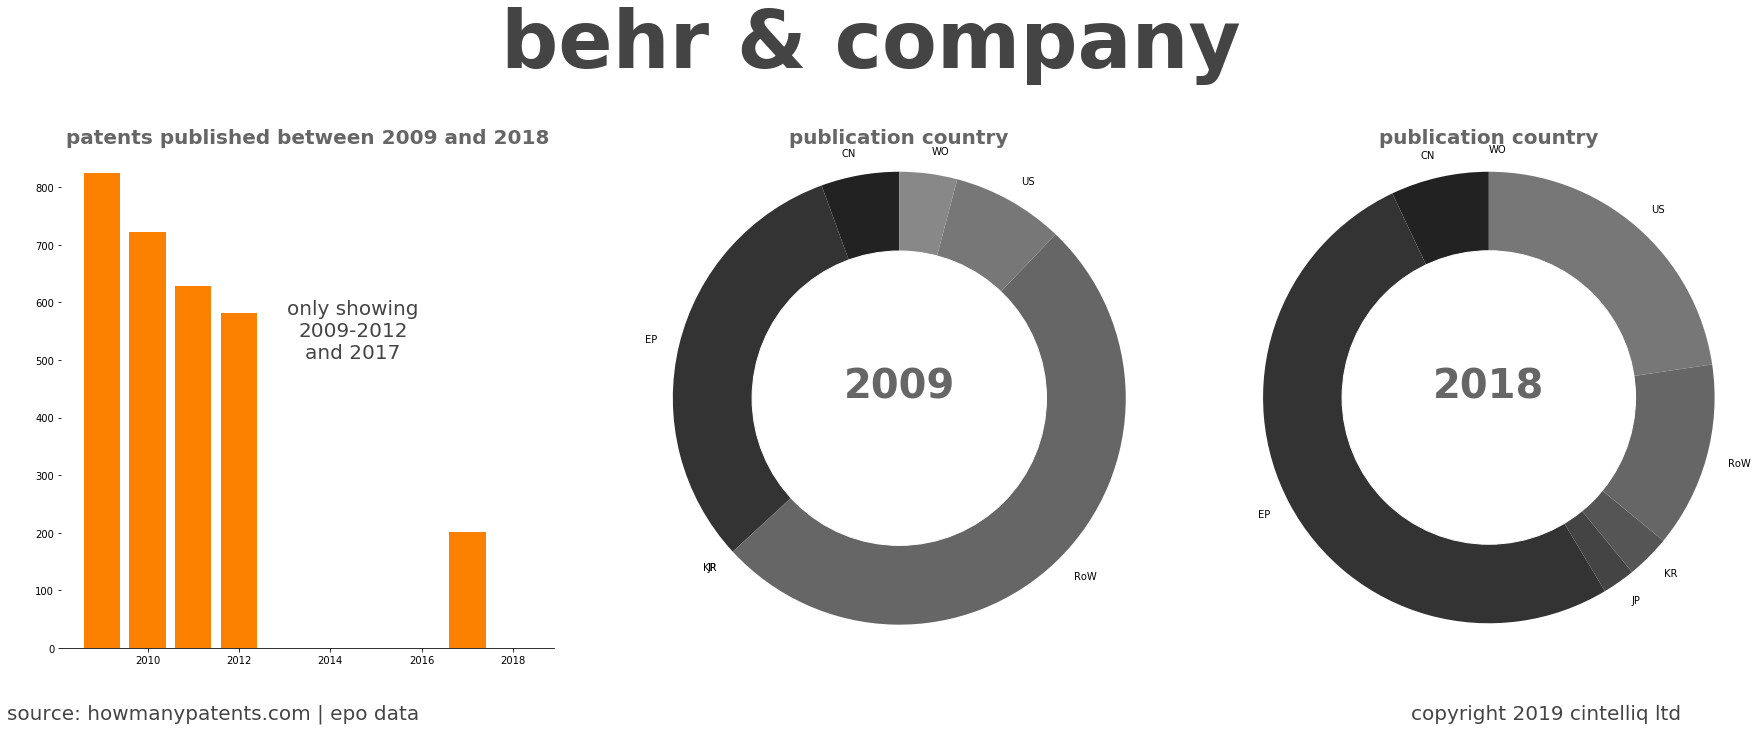 summary of patents for Behr & Company